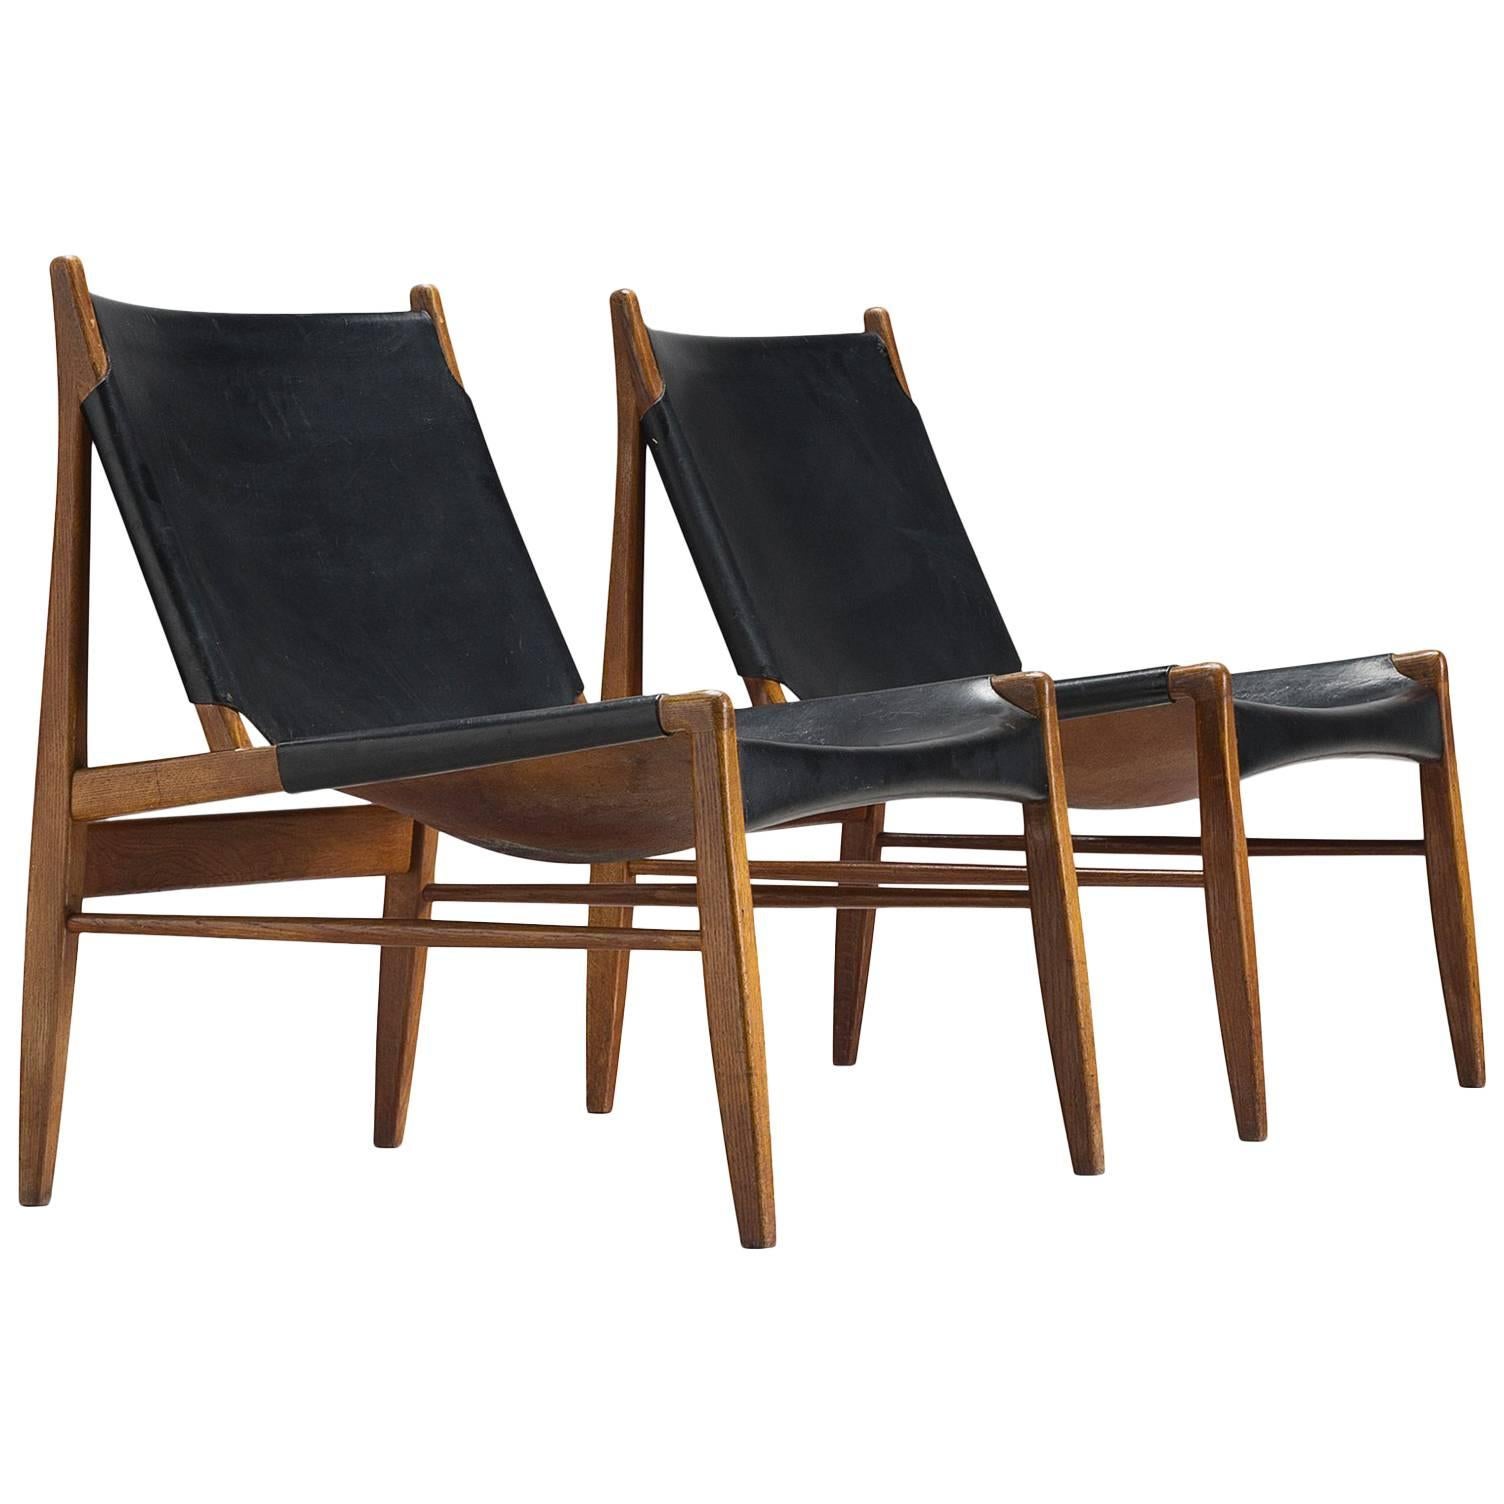 Pair of Hunting Chairs by Franz Xaver Lutz in Original Black Leather